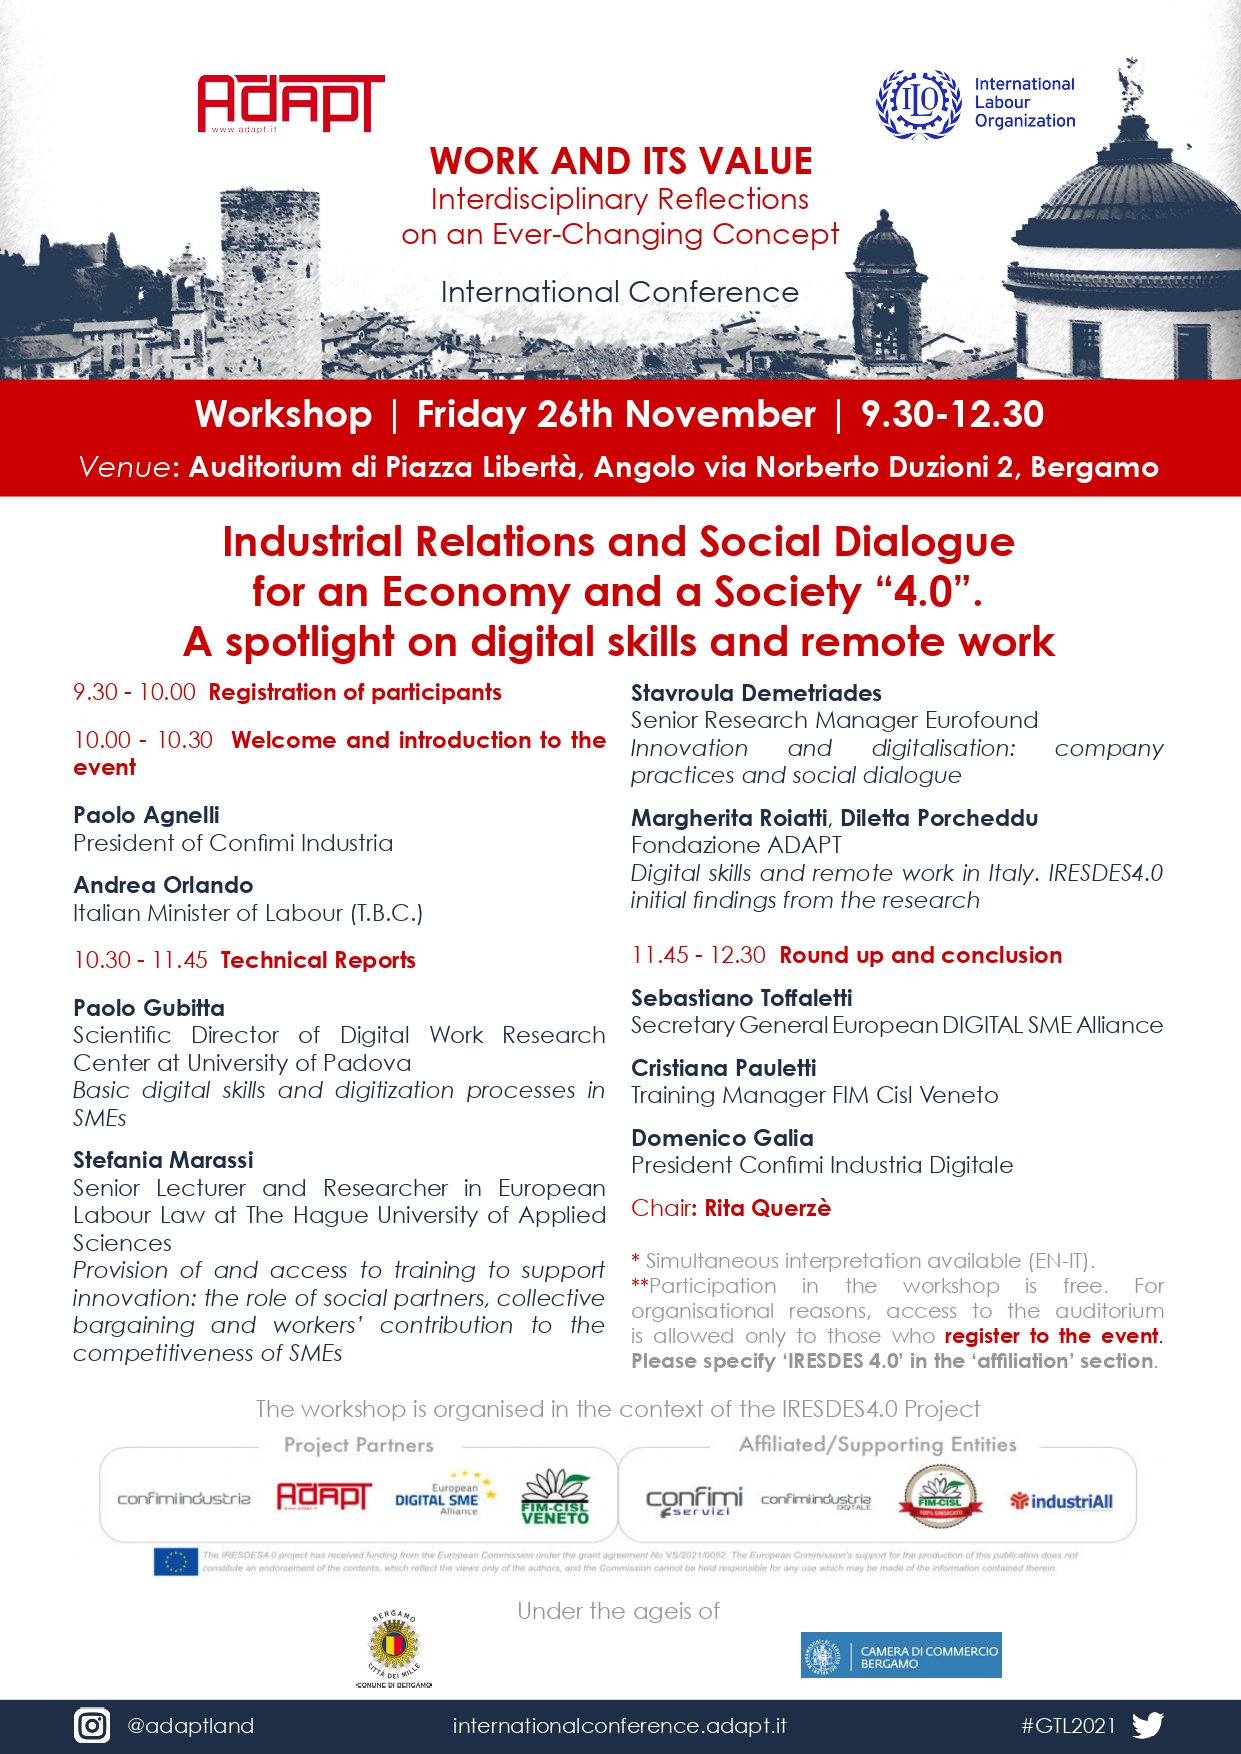 Industrial Relations and Social Dialogue for an Economy and a Society “4.0”. A spotlight on digital skills and remote work